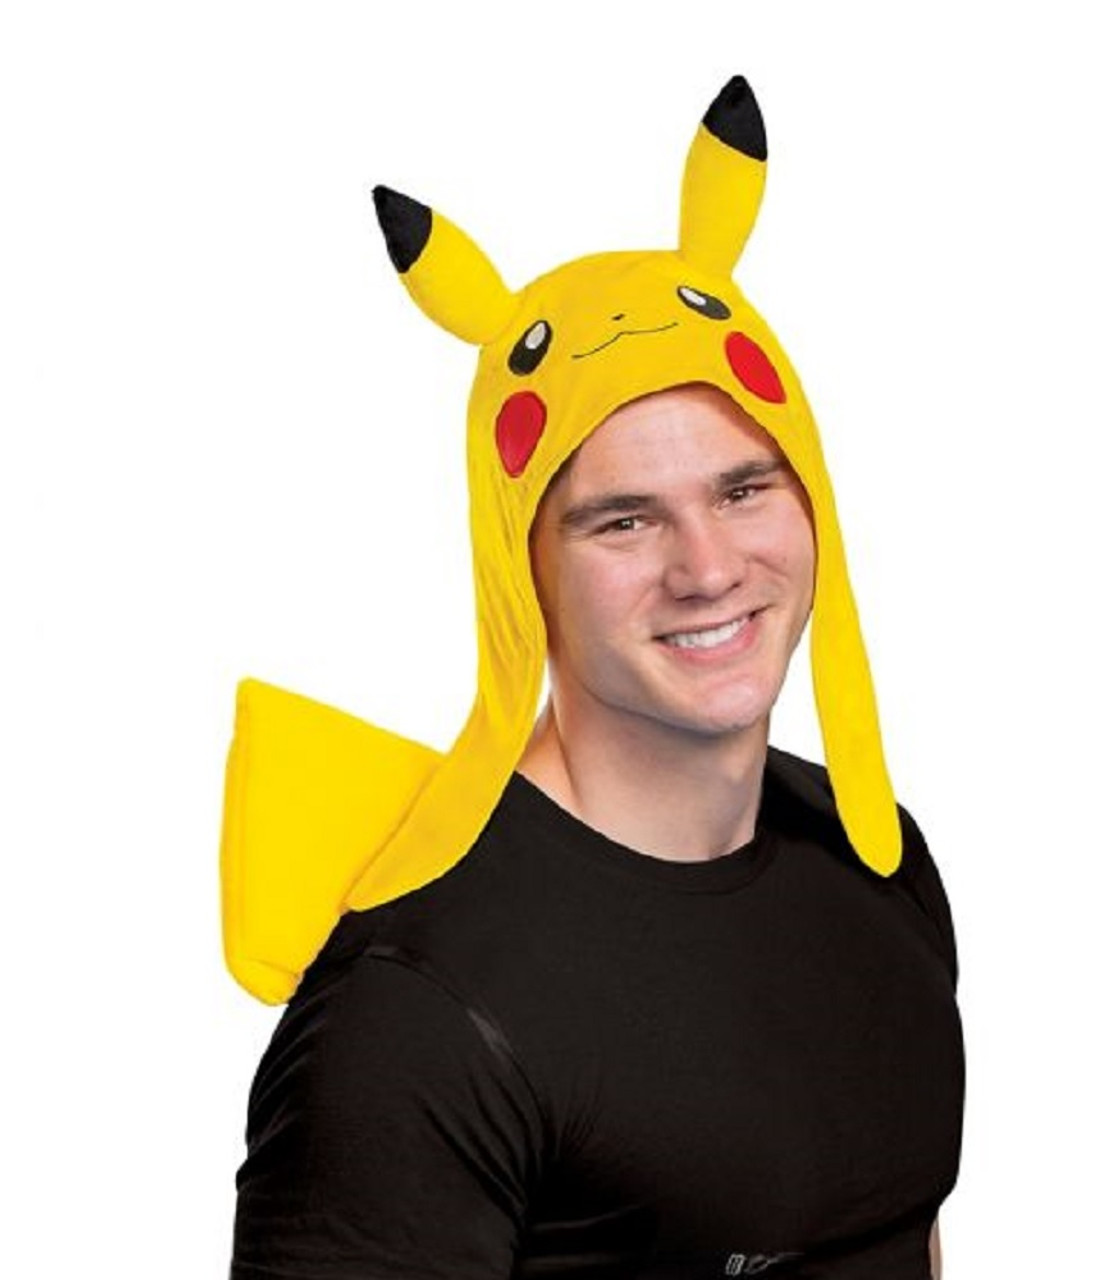 Disguise Pikachu Costume Romper, Official Pokemon Toddler Outfit and  Headpiece